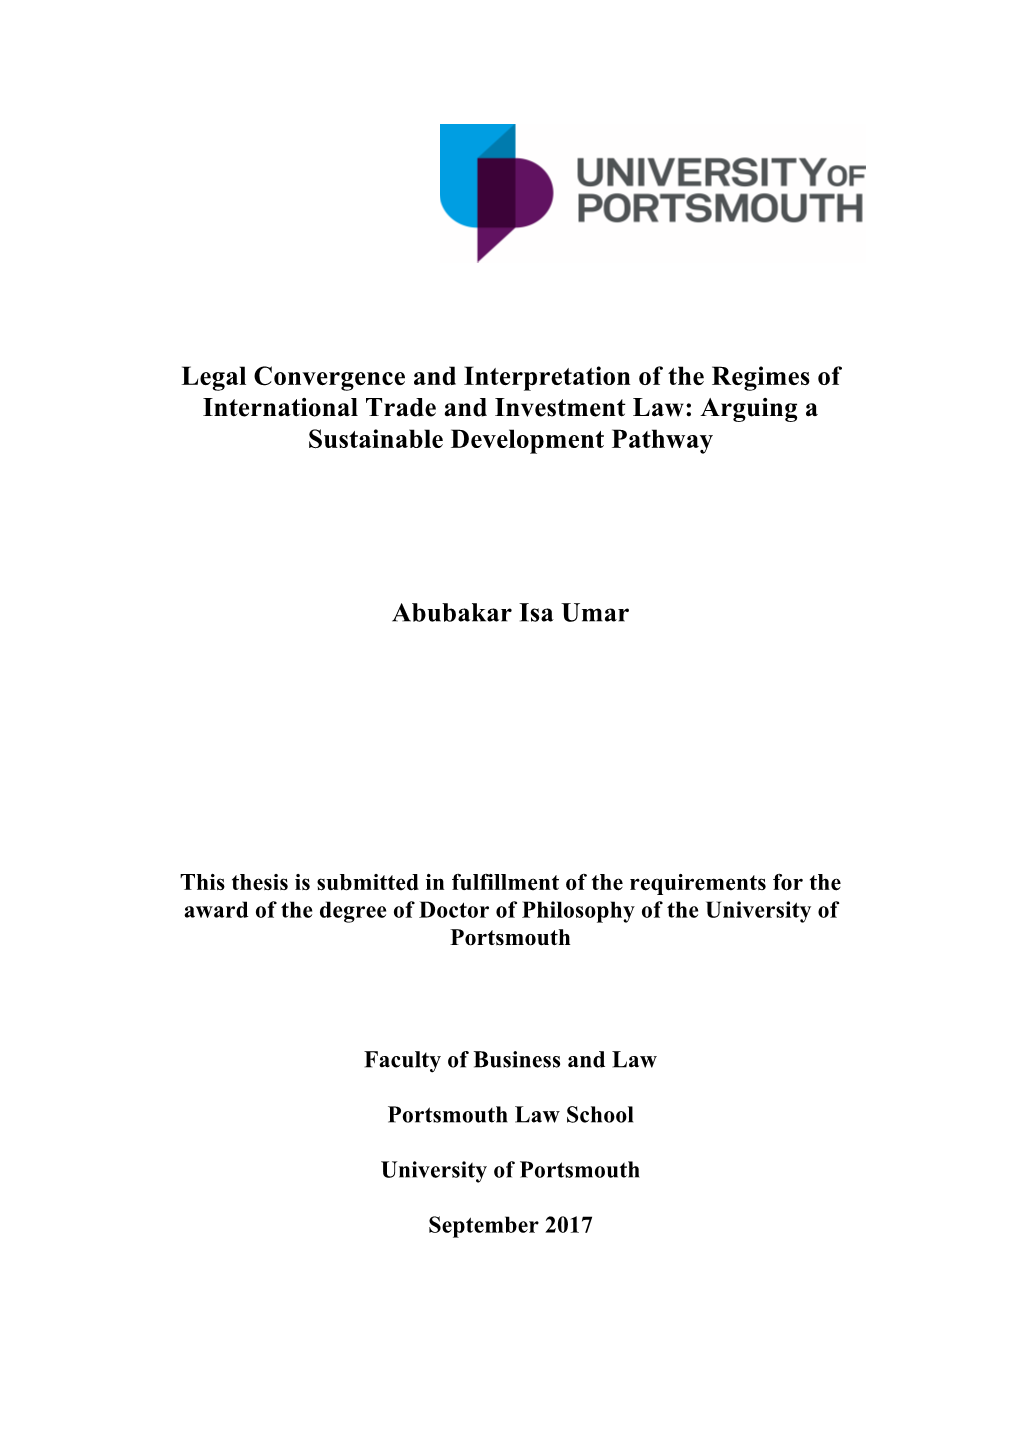 Legal Convergence and Interpretation of the Regimes of International Trade and Investment Law: Arguing a Sustainable Development Pathway